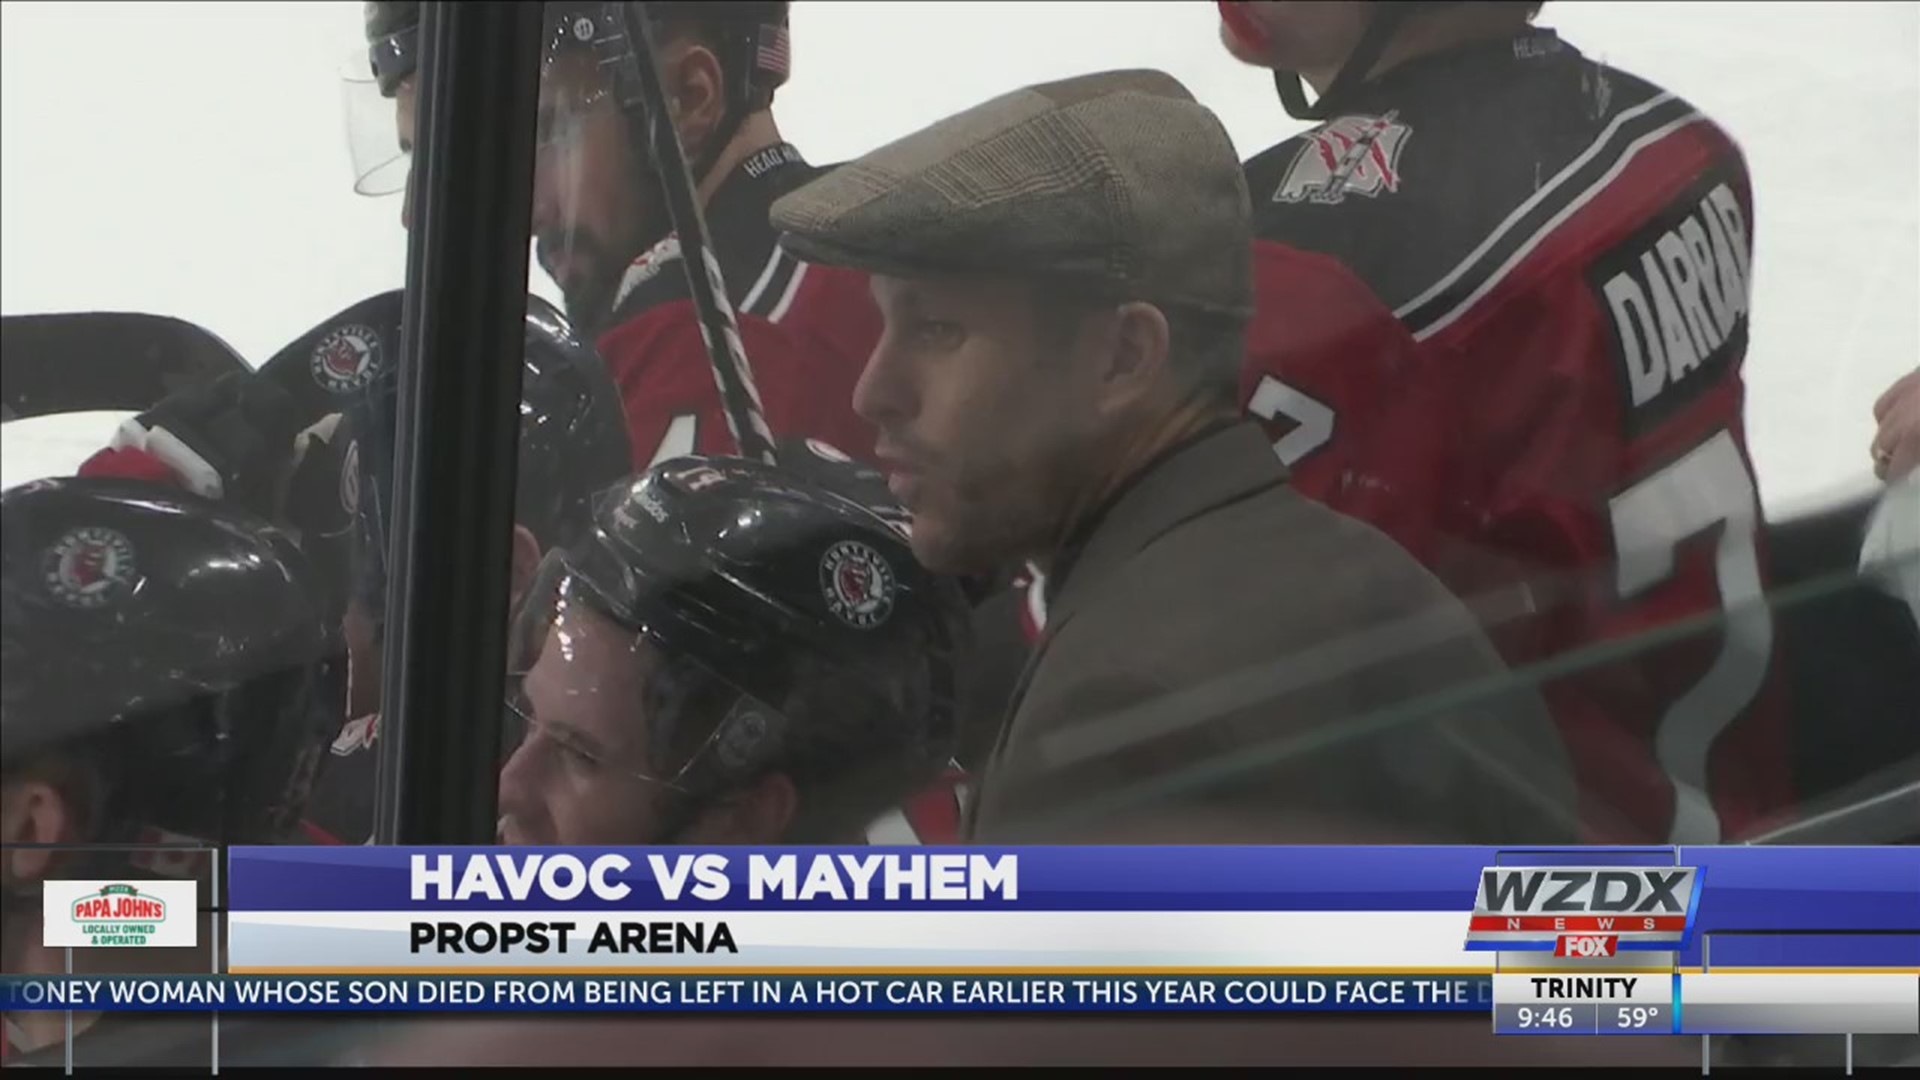 The Huntsville Havoc hosted the Macon Mayhem in their final home game of 2019. They would go on to win by a final of 4 to 3.